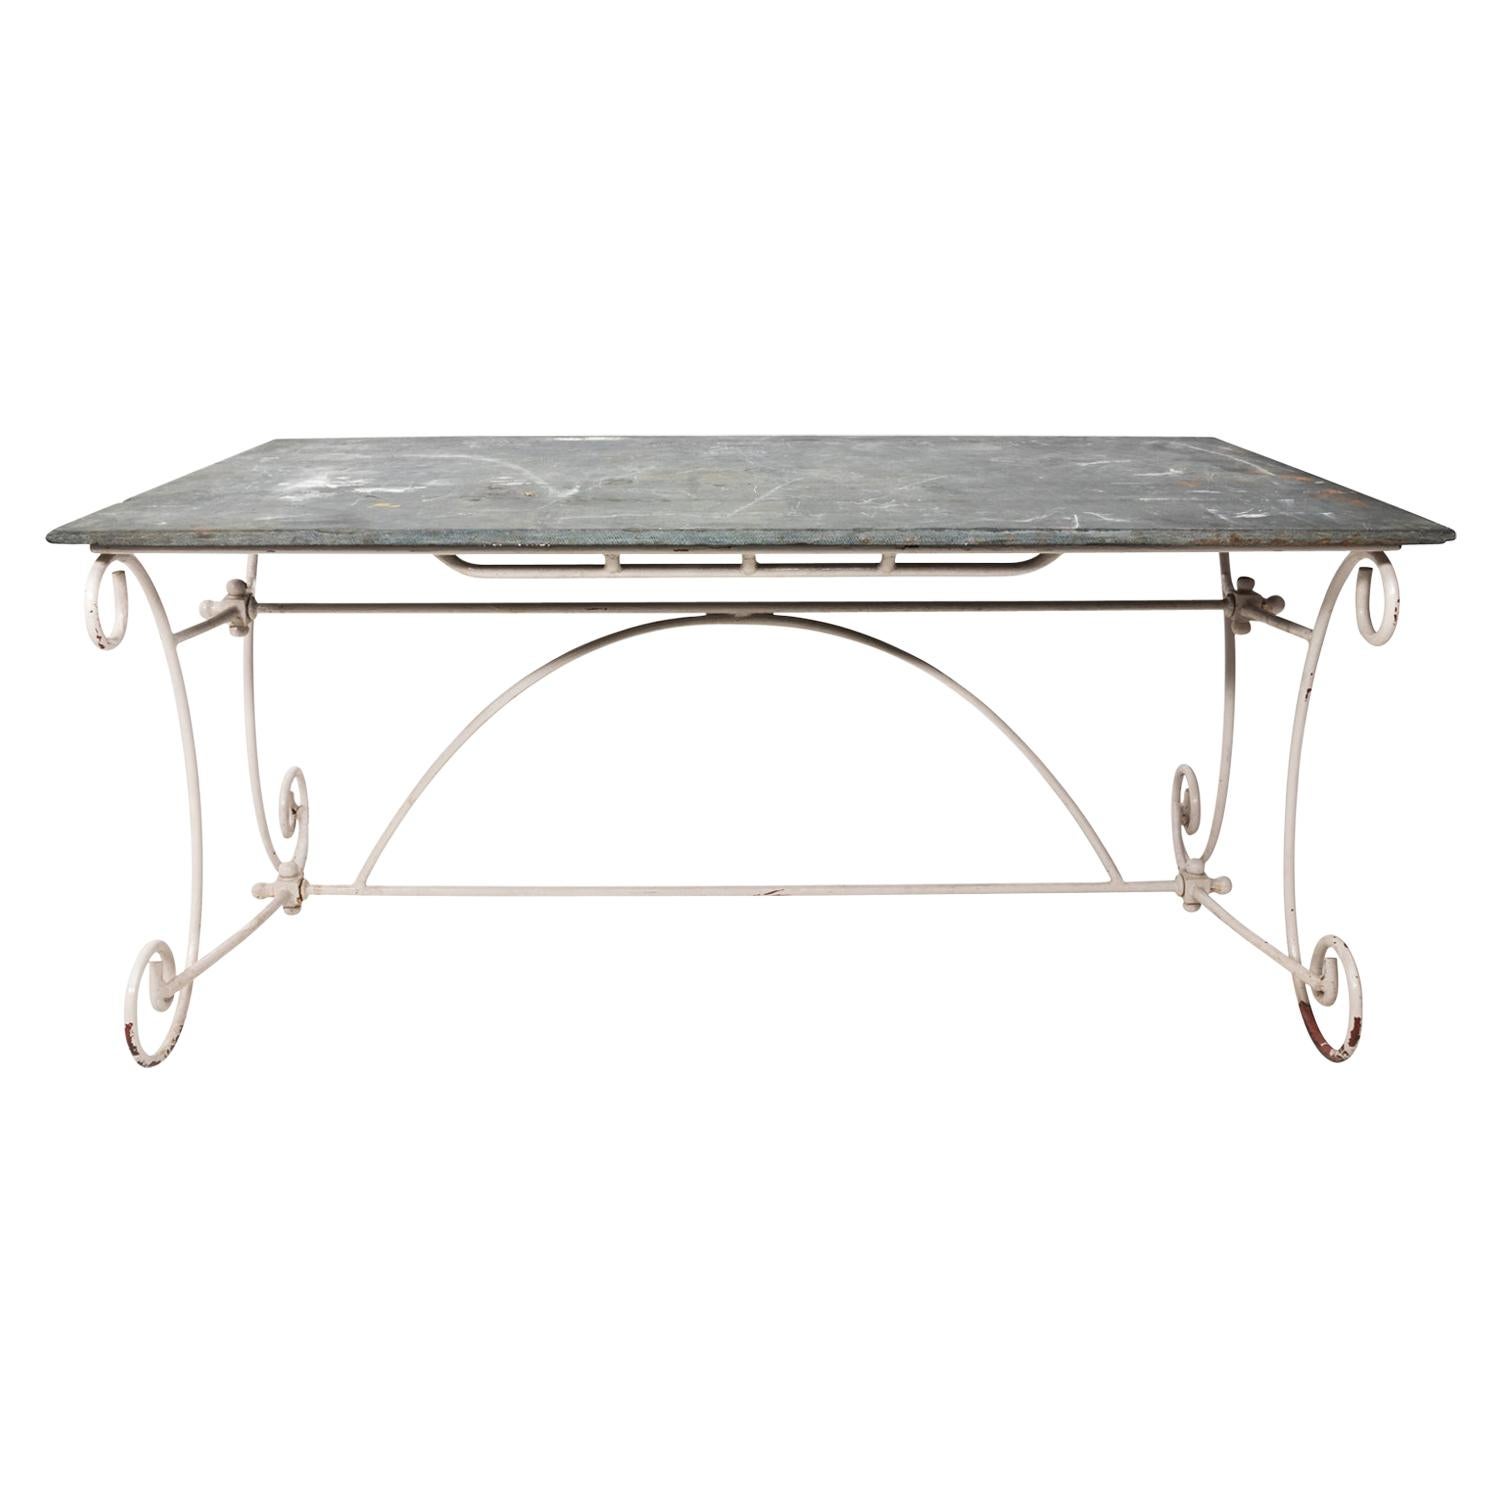 Slate Top Garden Dining Table For Sale